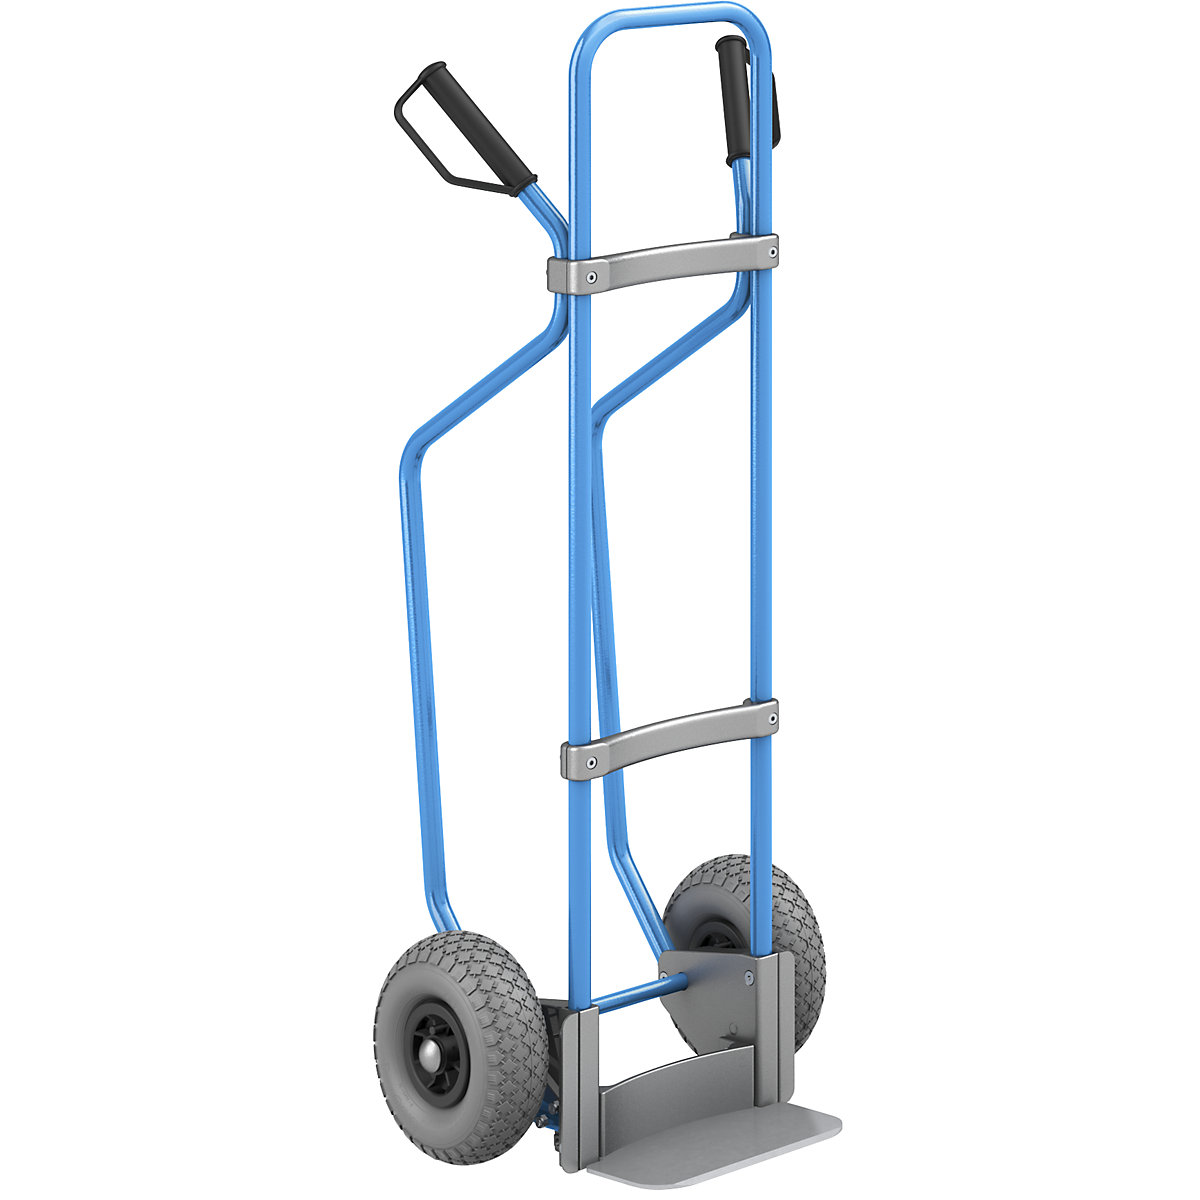 Sack truck with runners, blue – eurokraft pro, footplate WxD 280 x 140 mm, zinc plated, PU tyres-2